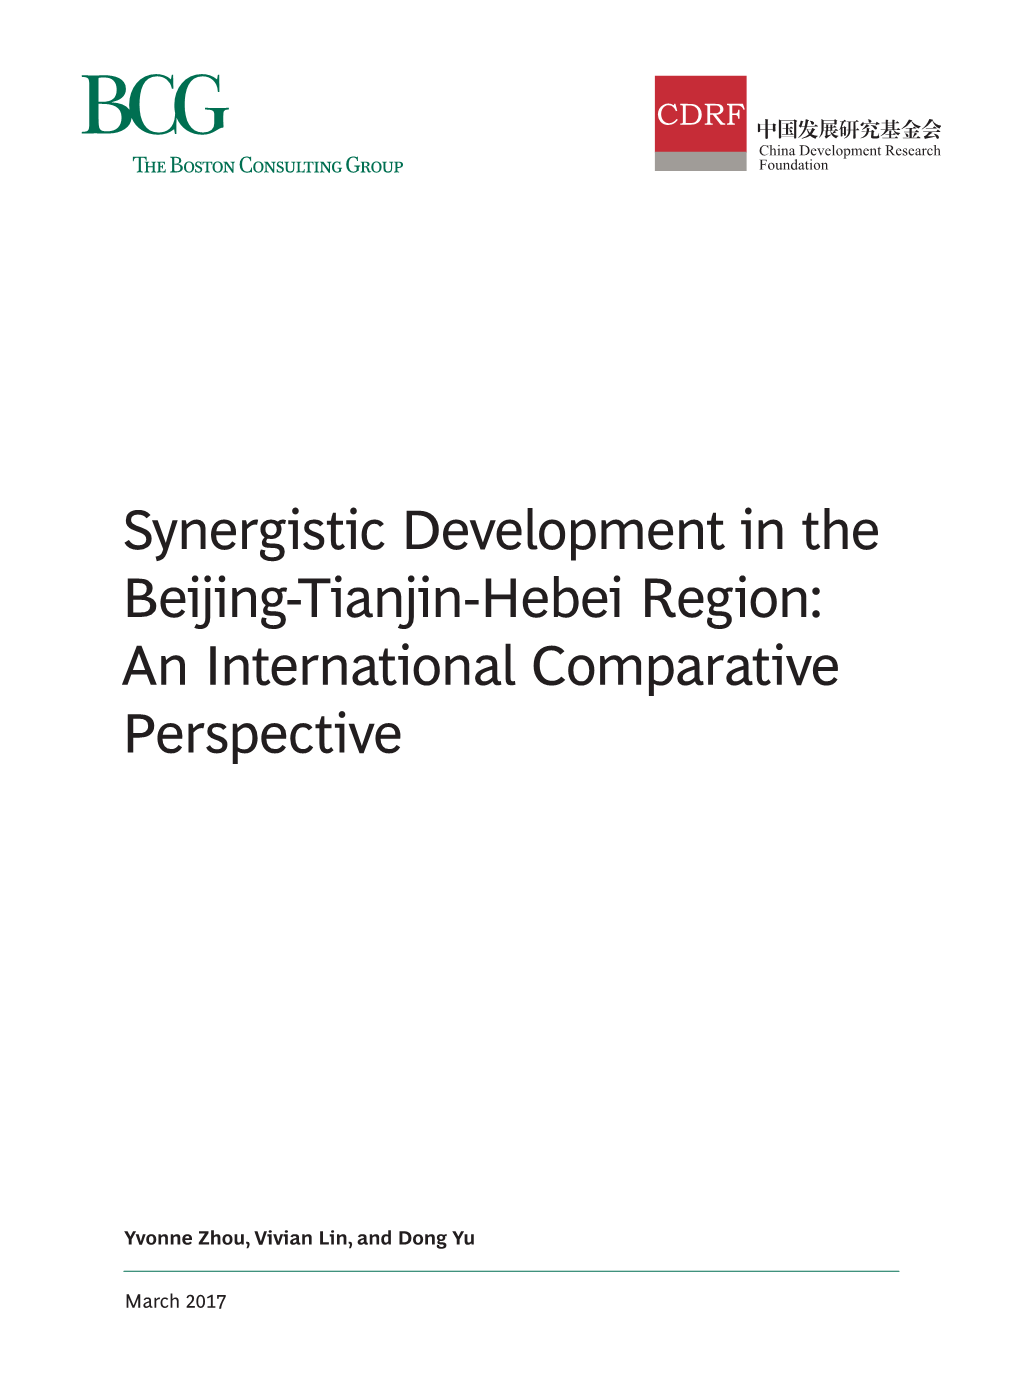 Synergistic Development in the Beijing-Tianjin-Hebei Region: an International Comparative Perspective